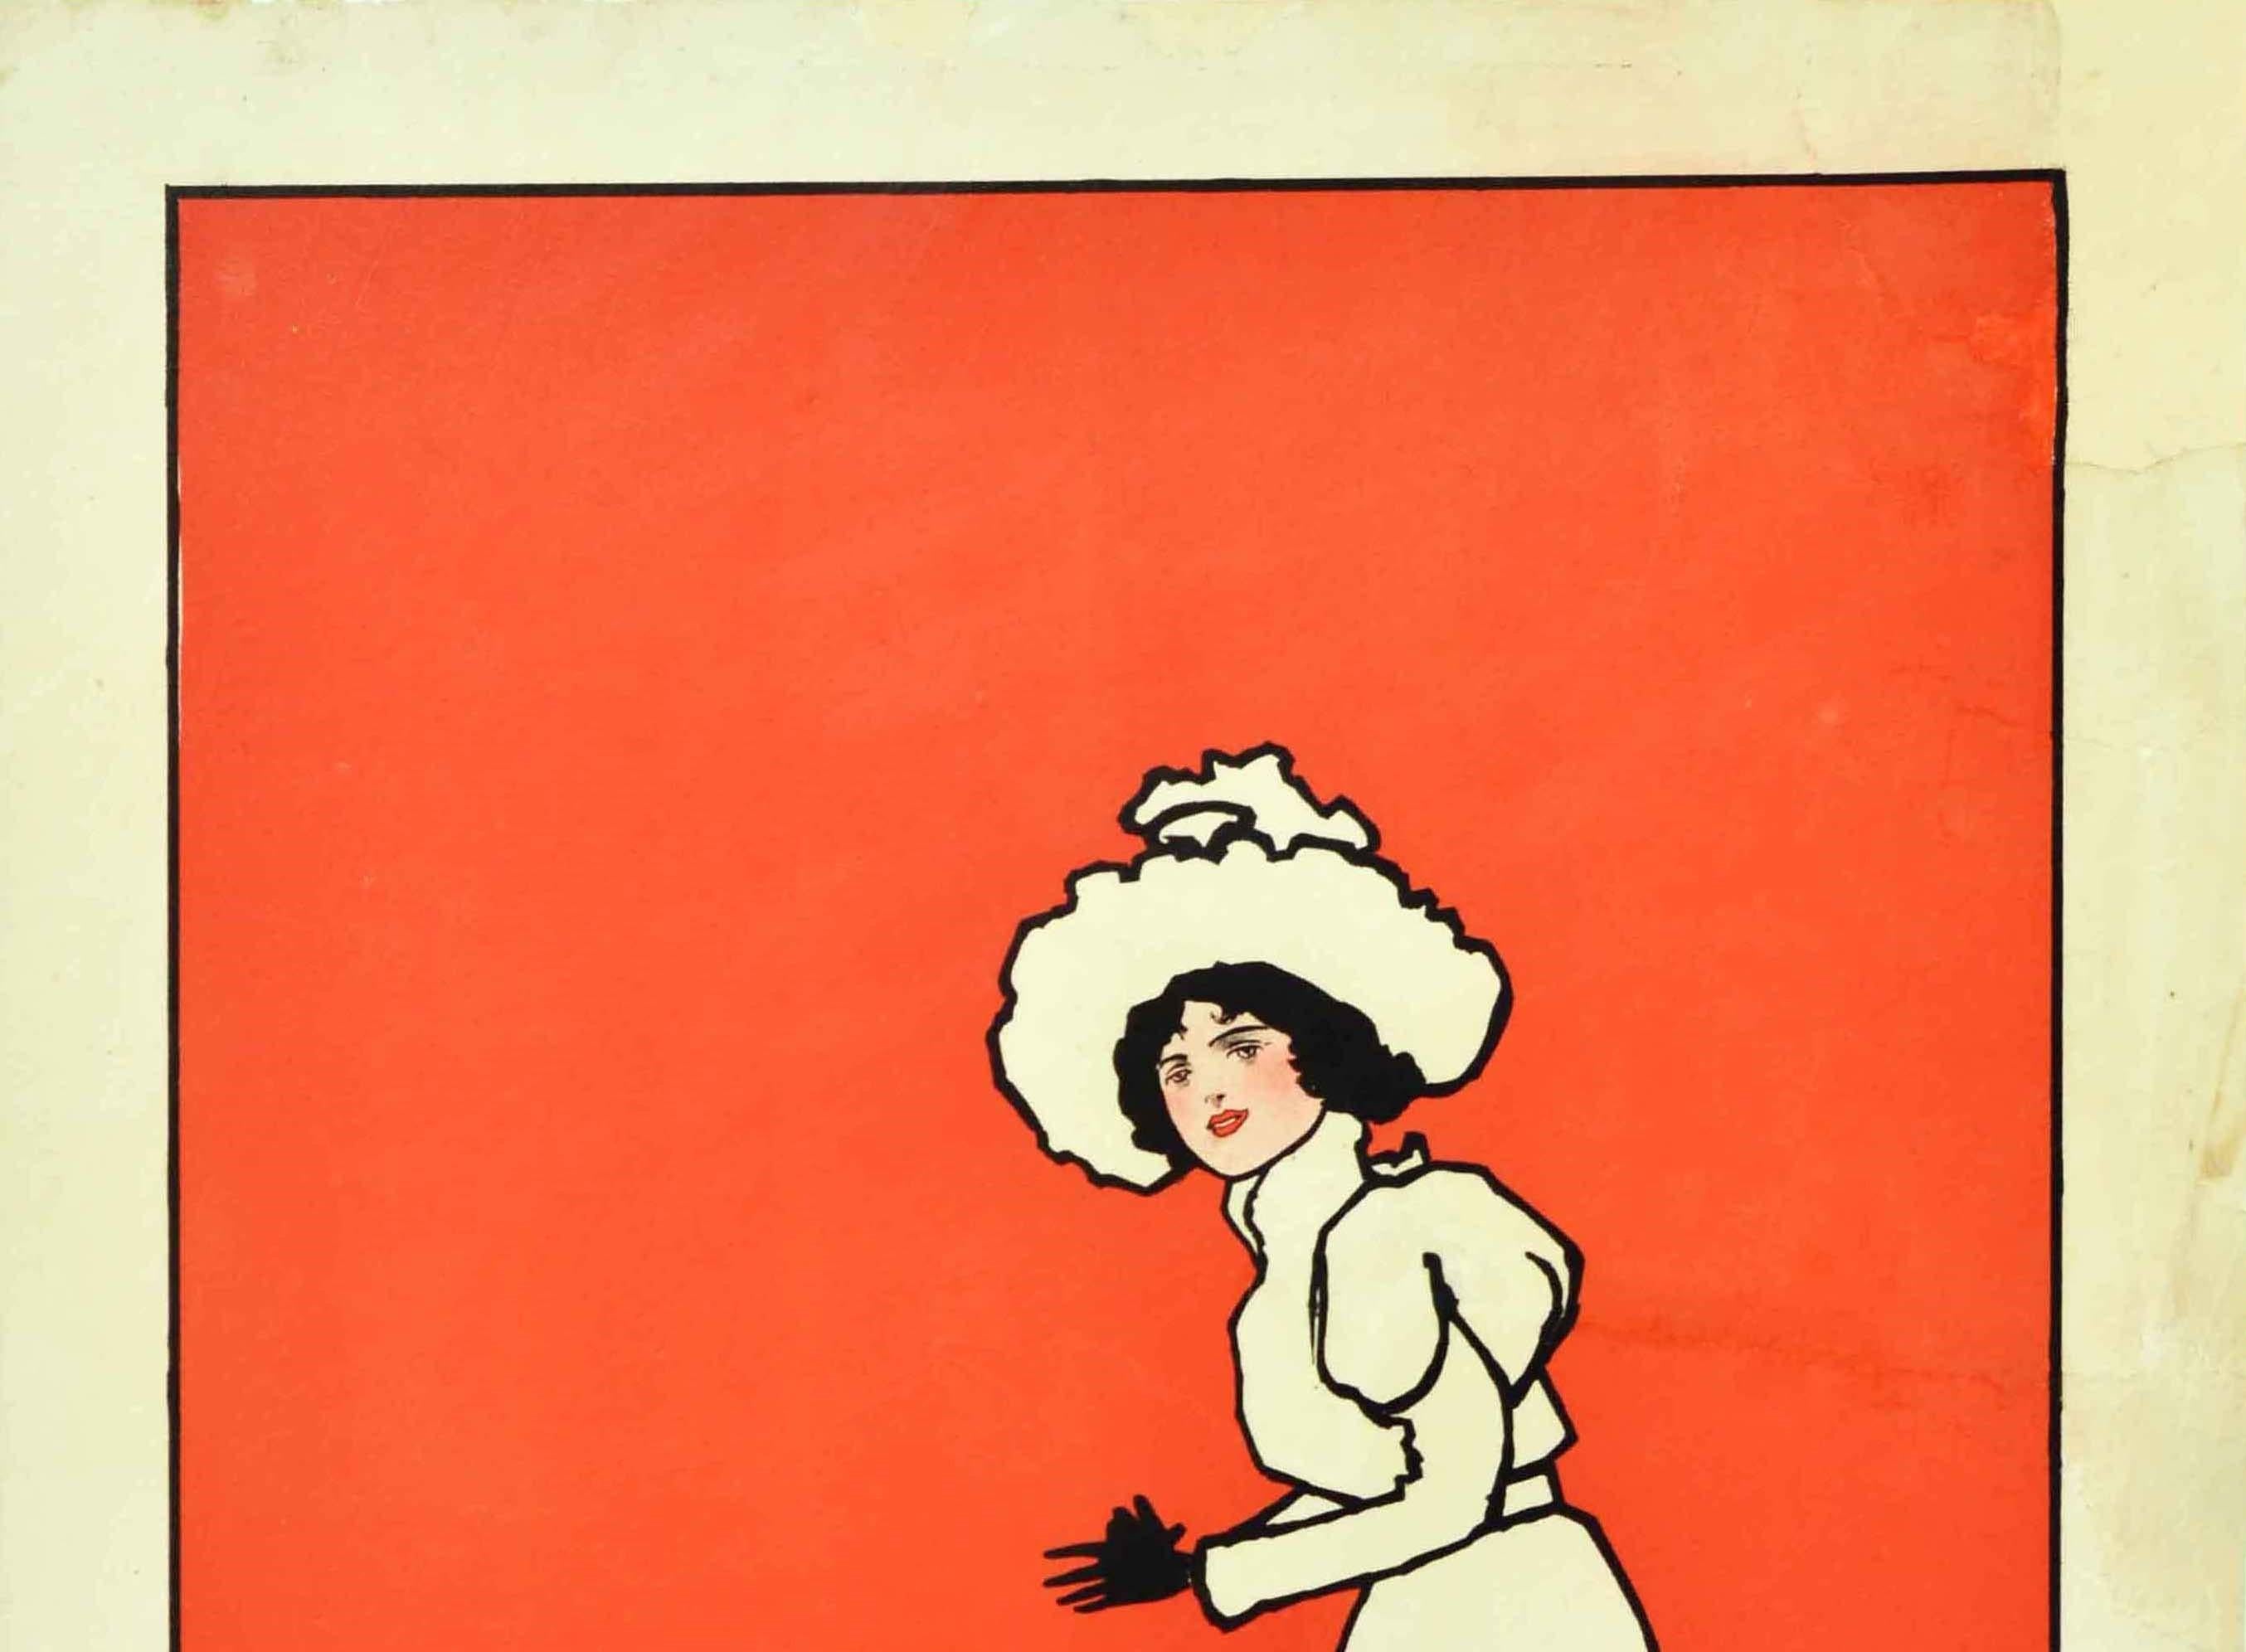 Original antique fashion advertising poster featuring an illustration by the notable artist John Hassall (1868-1948) of an elegantly dressed Victorian lady in a long white dress and white hat looking towards the viewer, depicted against a black and